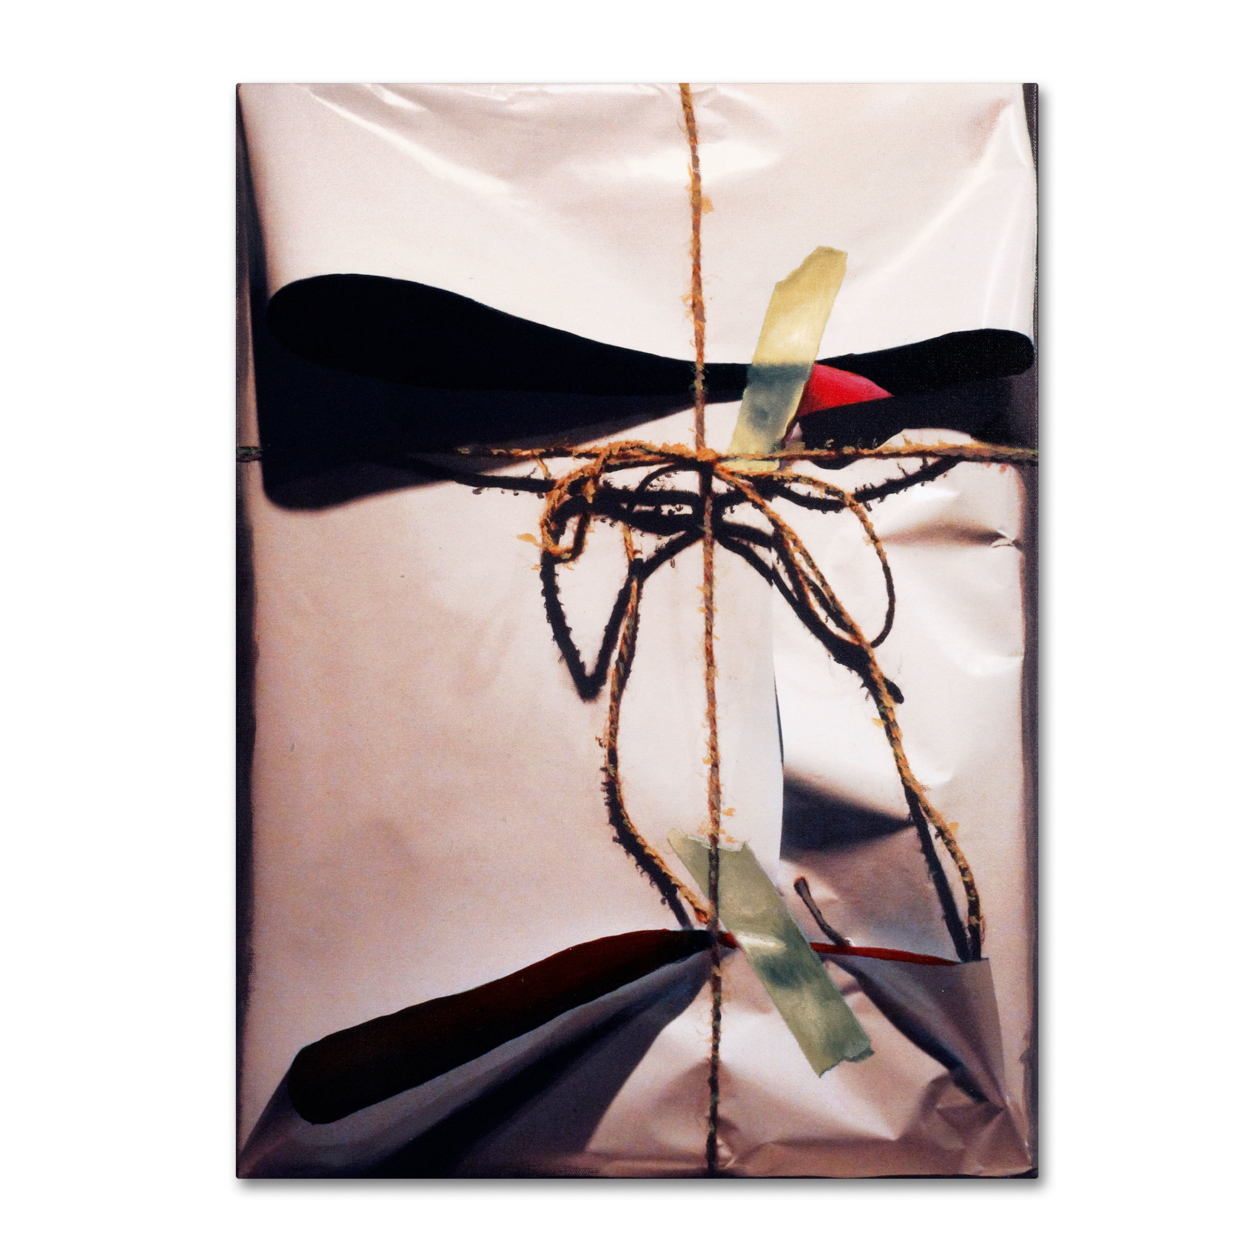 Roderick Stevens 'White Wrap With Twine' Canvas Art 18 X 24